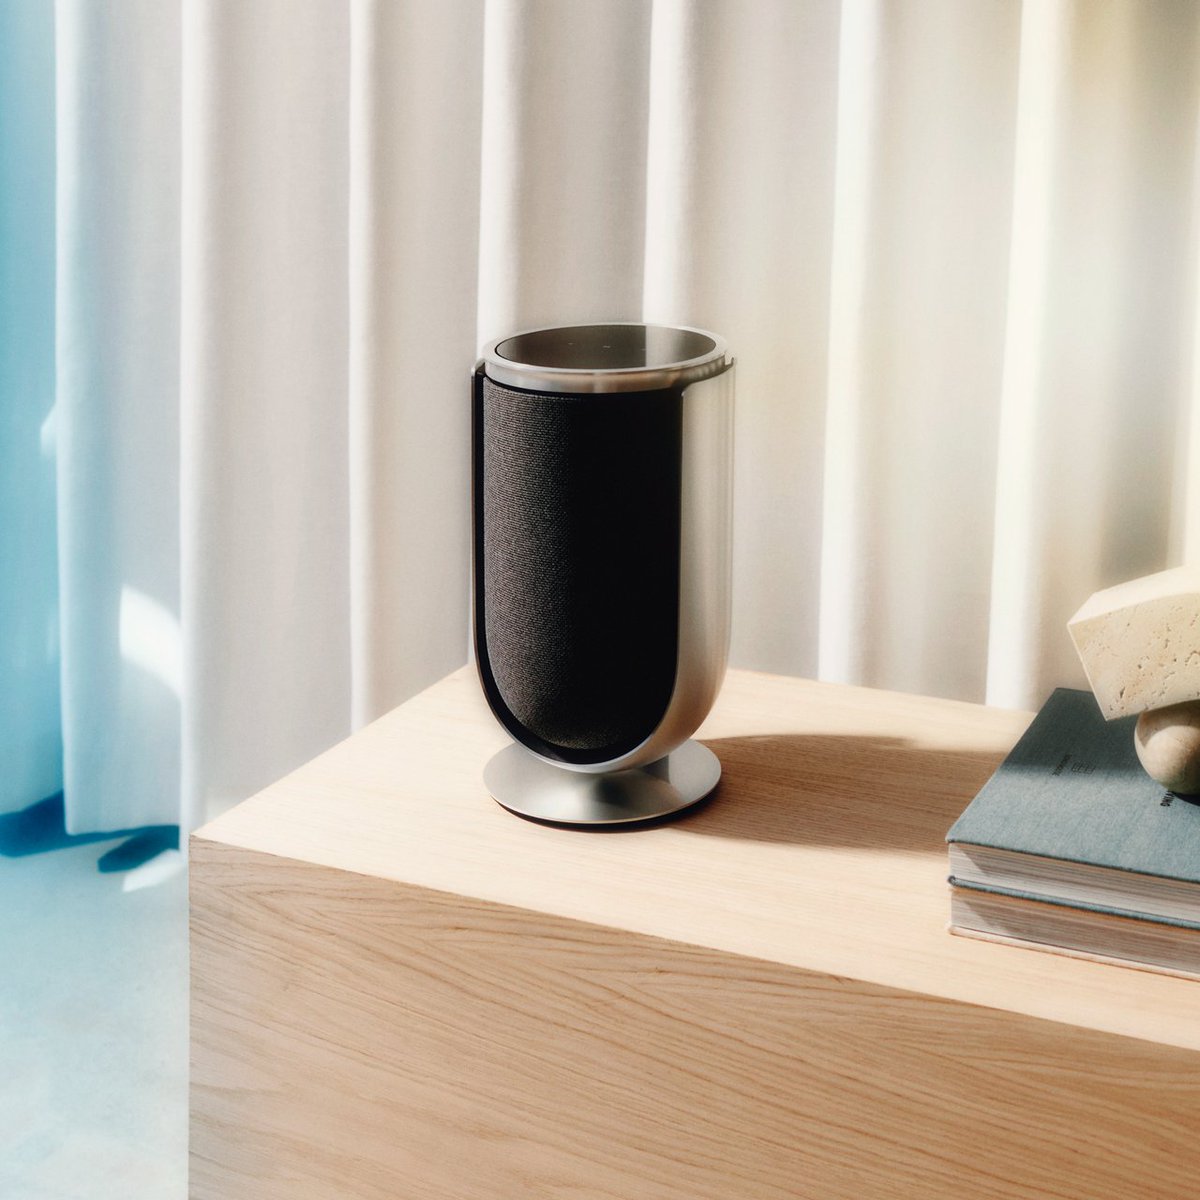 Beolab 8, compact and powerful as a surround, stereo, or standalone speaker, Beolab 8 adapts to your space, offers versatile connections, and elevates your audio experience through advanced acoustics, materials, and stand options.

#Beolab8 #BangOlufsen